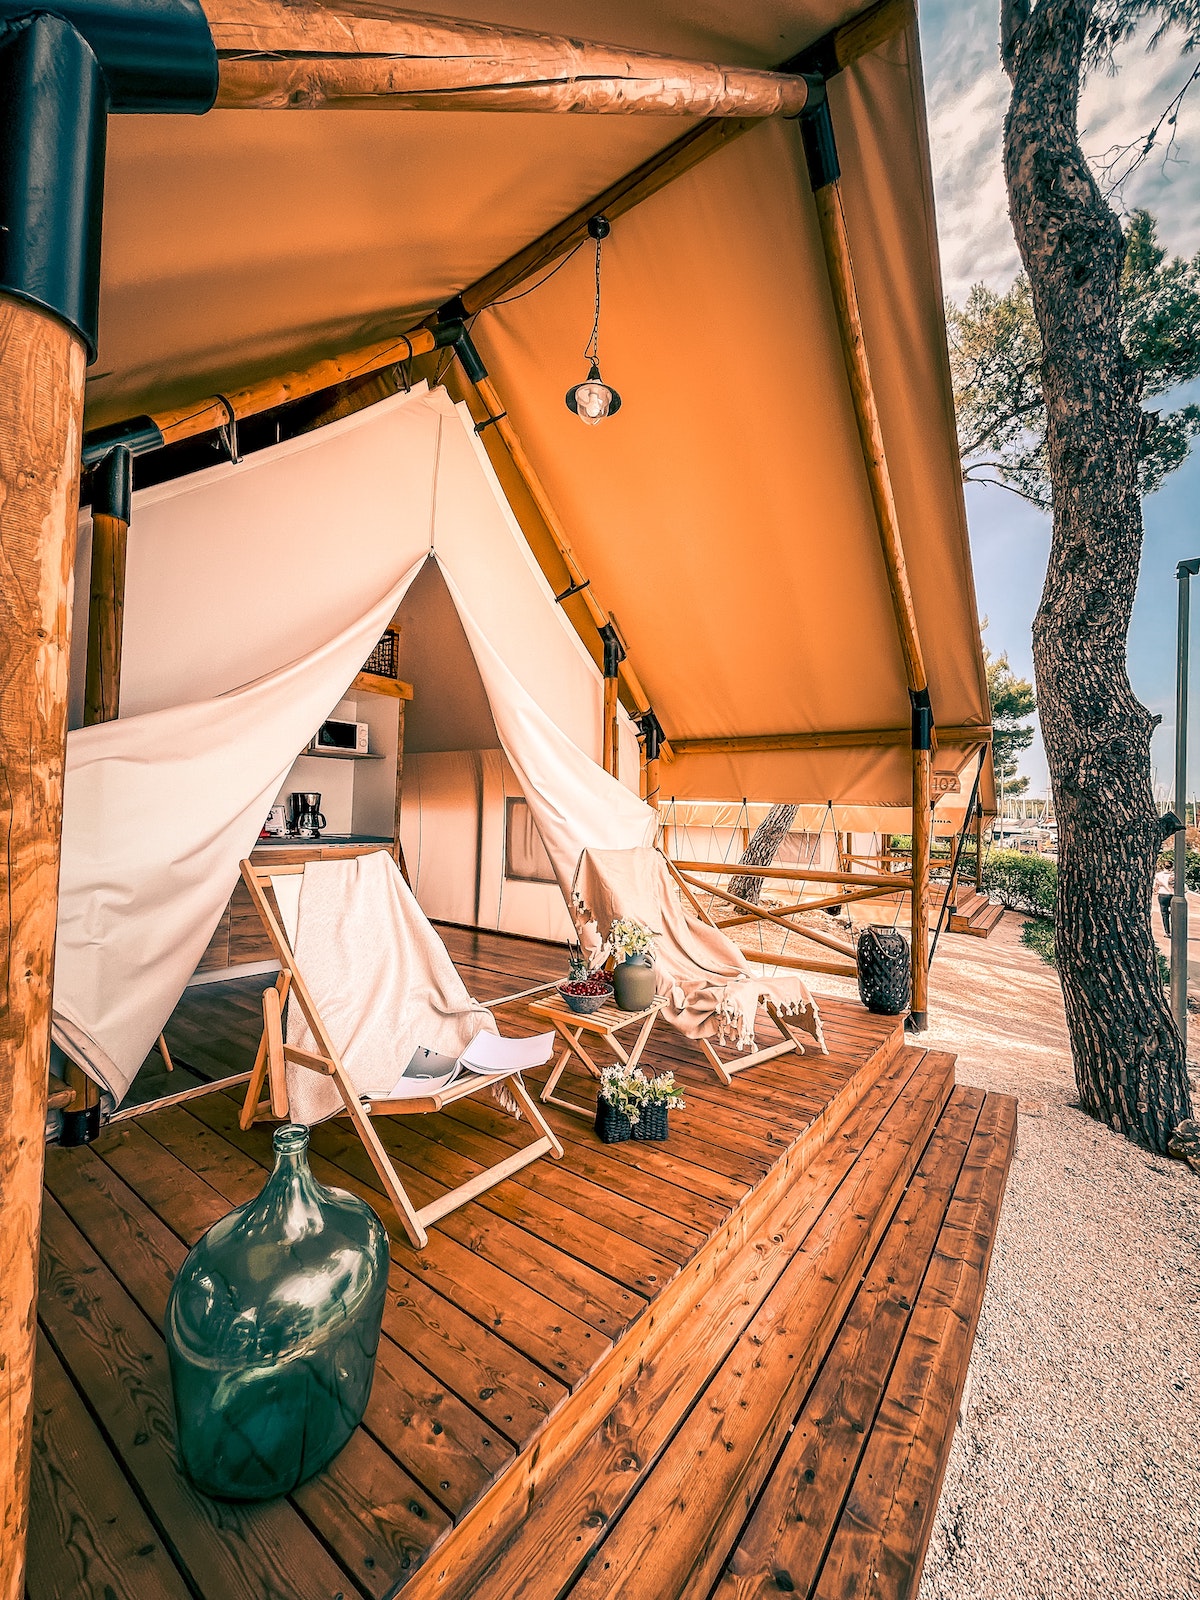 Why people love glamping